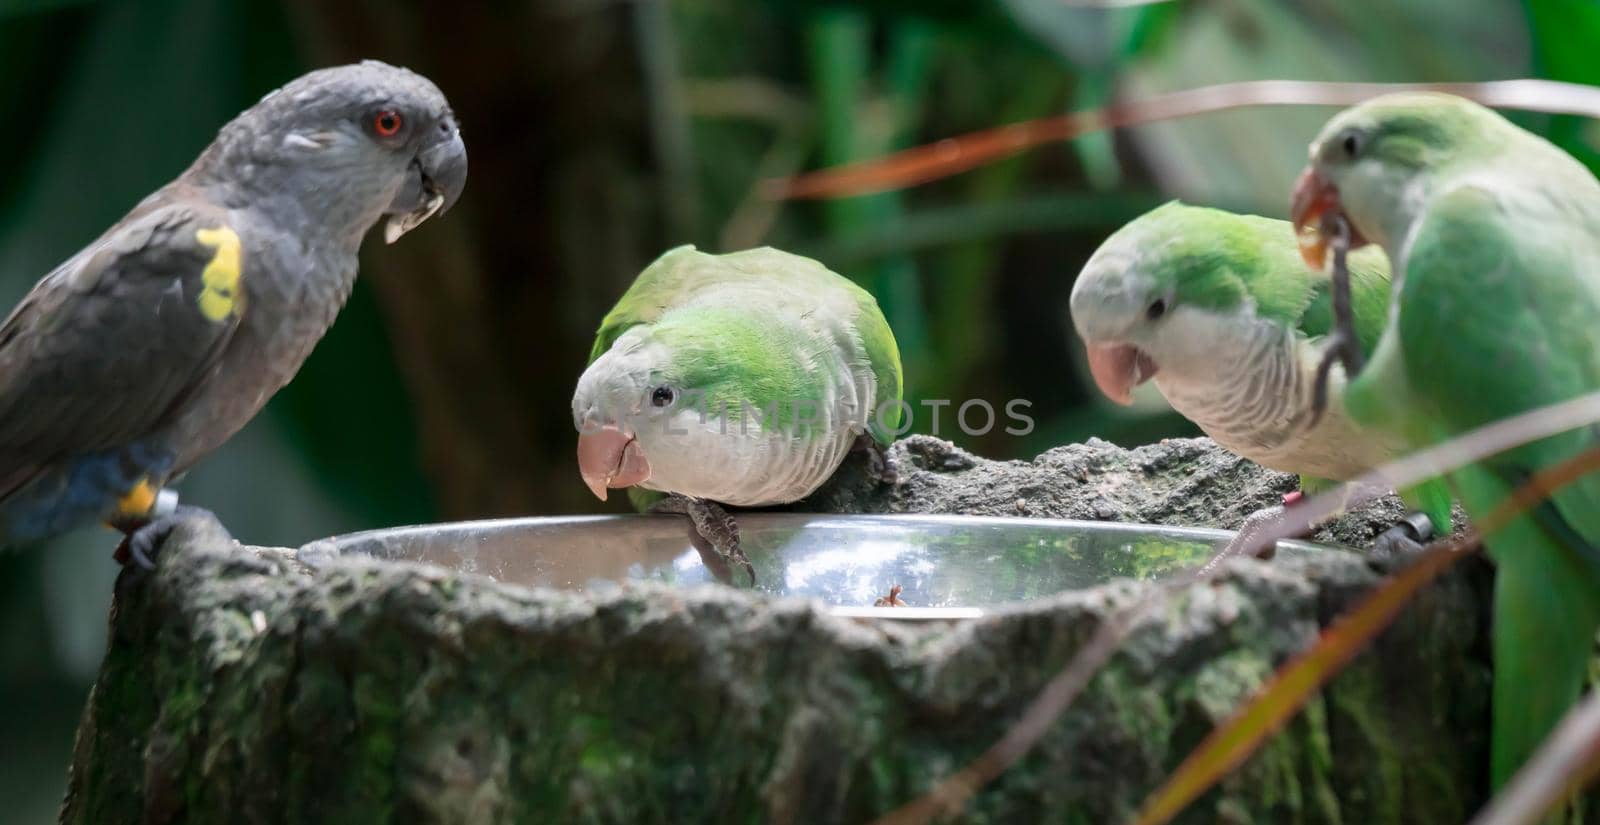 The monk parakeet (Myiopsitta monachus), also known as the Quaker parrot while eating by billroque